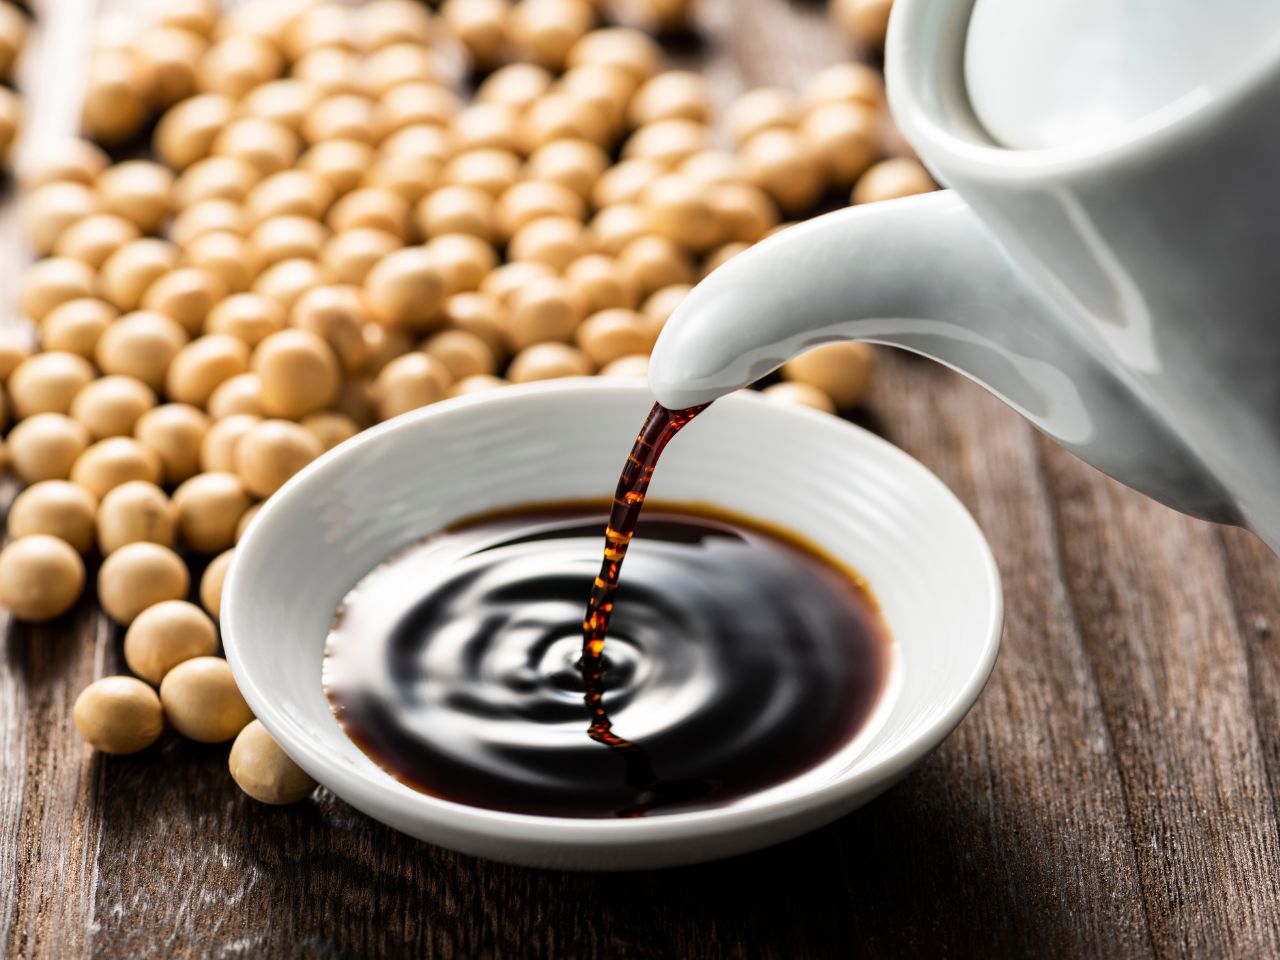 A bottle of soy sauce being poured into a bowl surrounded by soy beans.